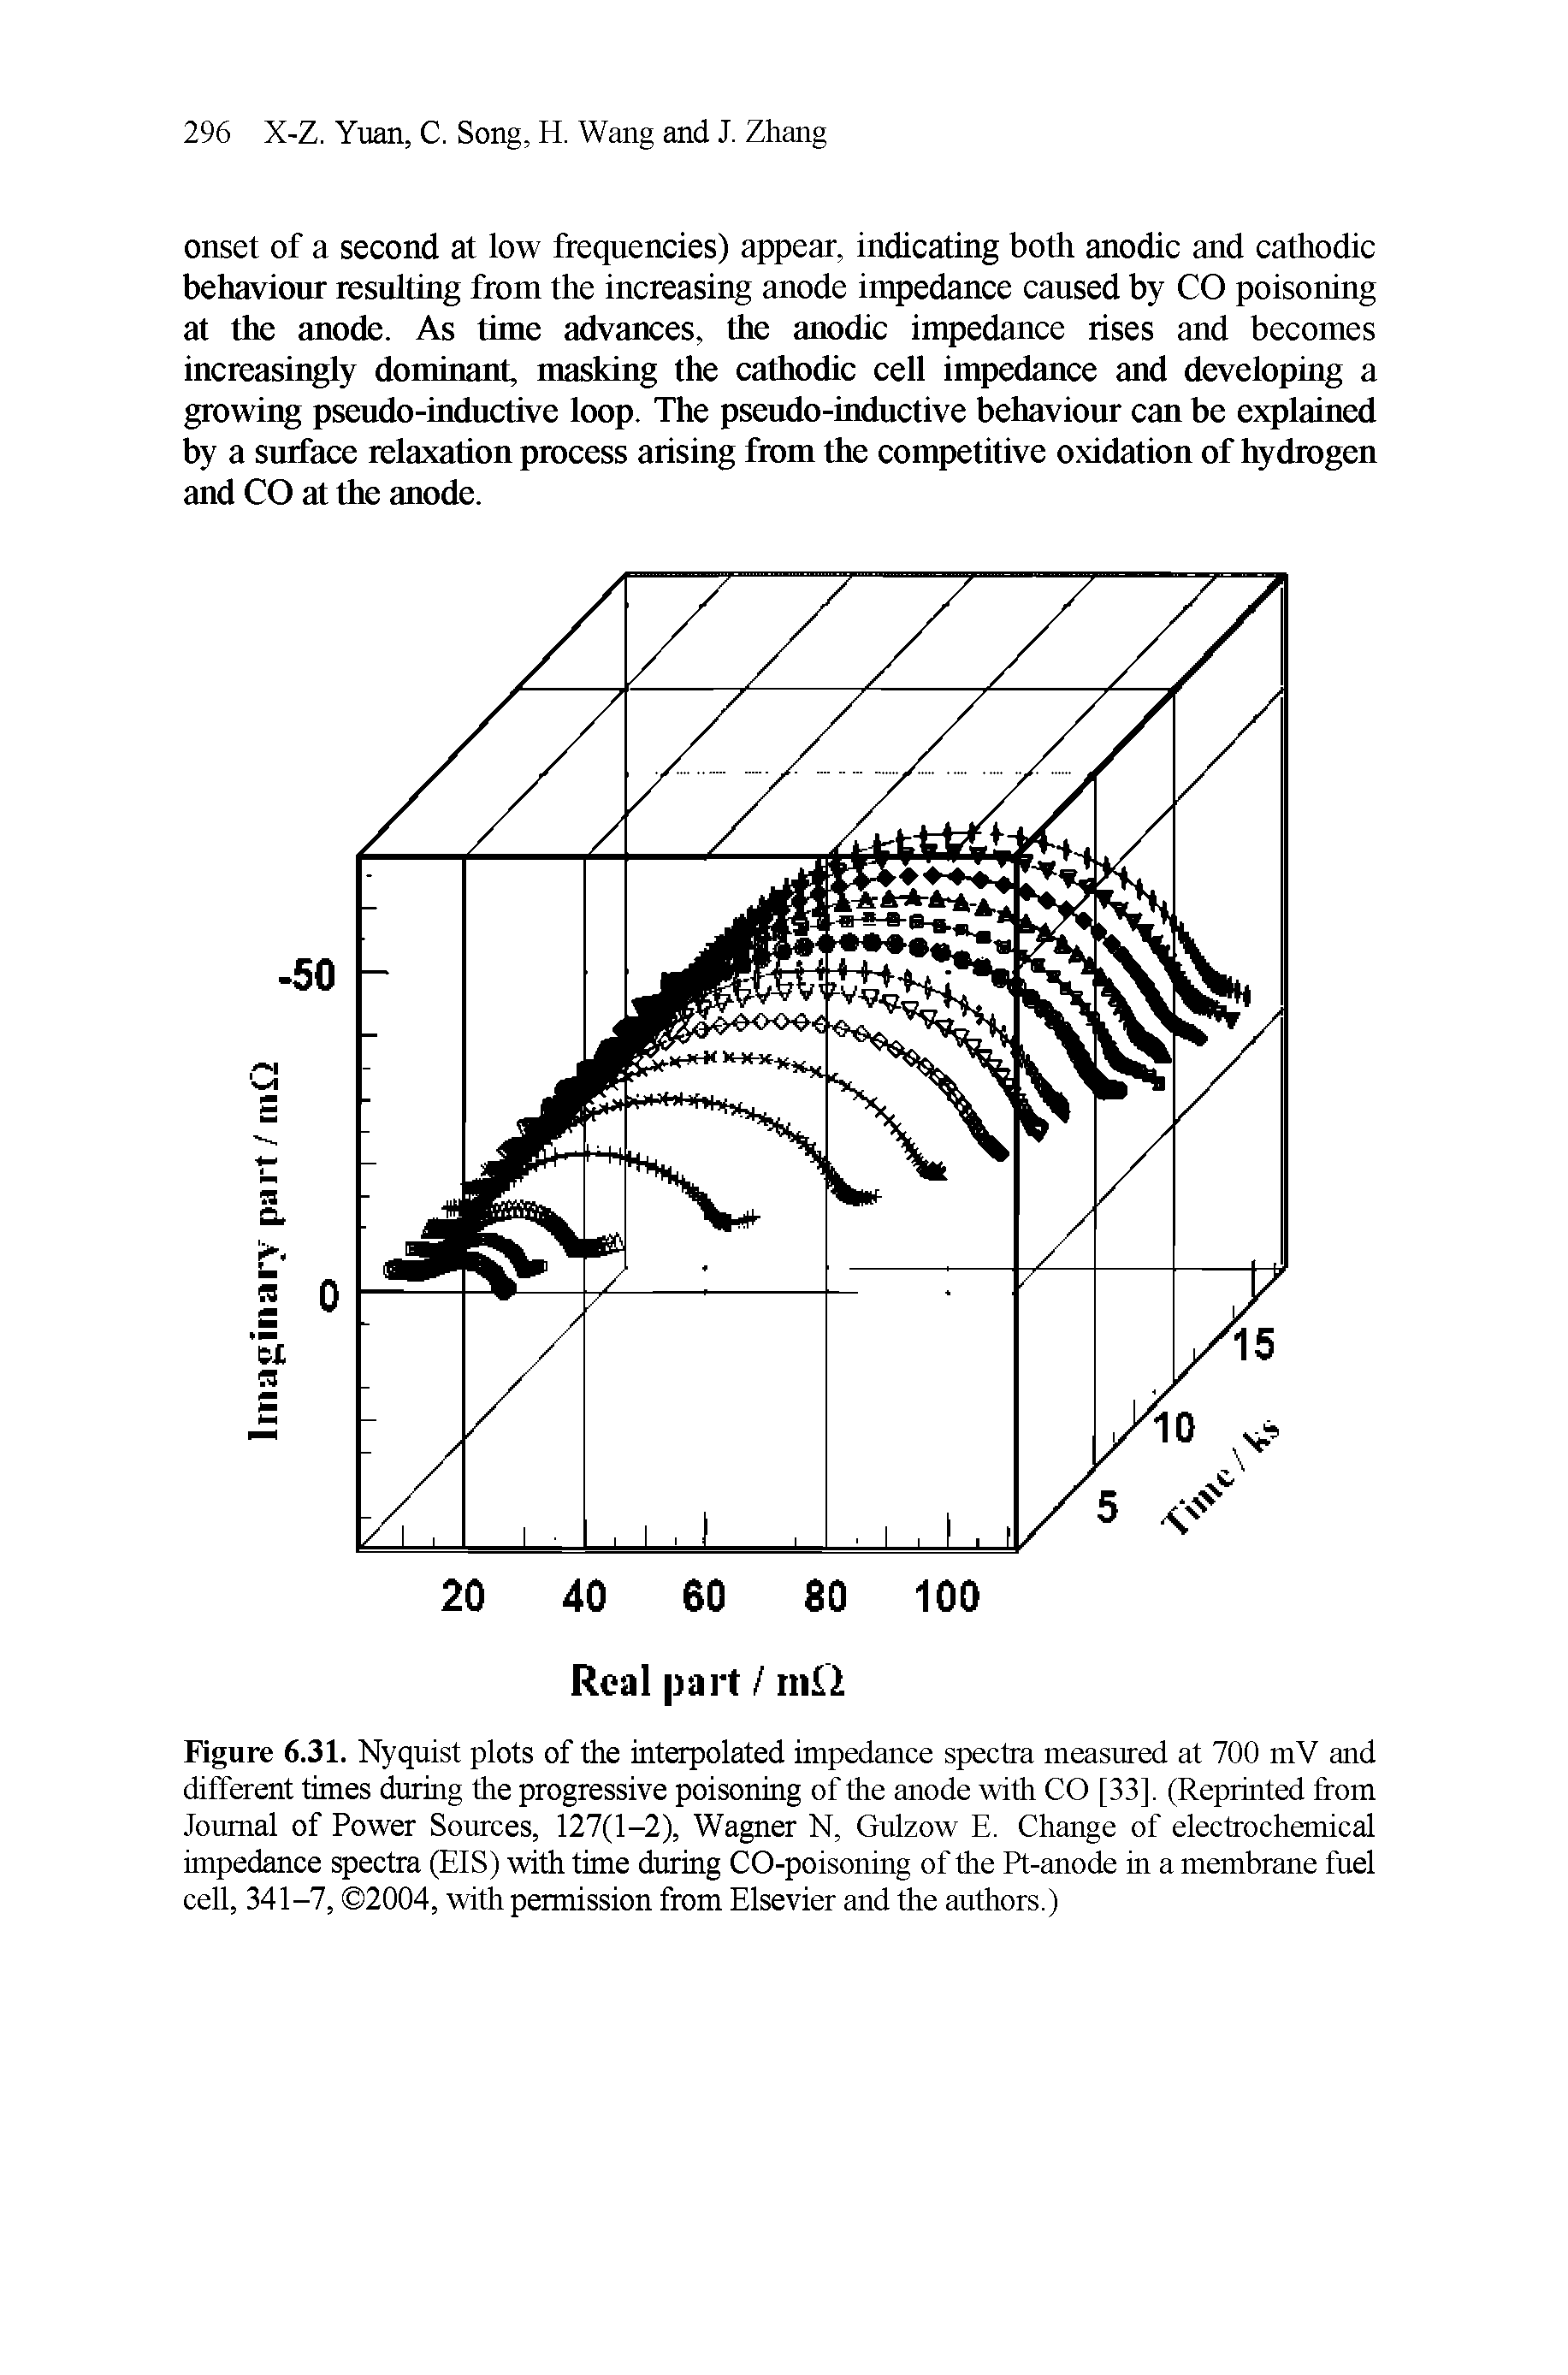 Figure 6.31. Nyquist plots of the interpolated impedance spectra measured at 700 mV and different times during the progressive poisoning of the anode with CO [33], (Reprinted from Journal of Power Sources, 127(1-2), Wagner N, Gulzow E. Change of electrochemical impedance spectra (EIS) with time during CO-poisoning of the Pt-anode in a membrane fuel cell, 341-7, 2004, with permission from Elsevier and the authors.)...